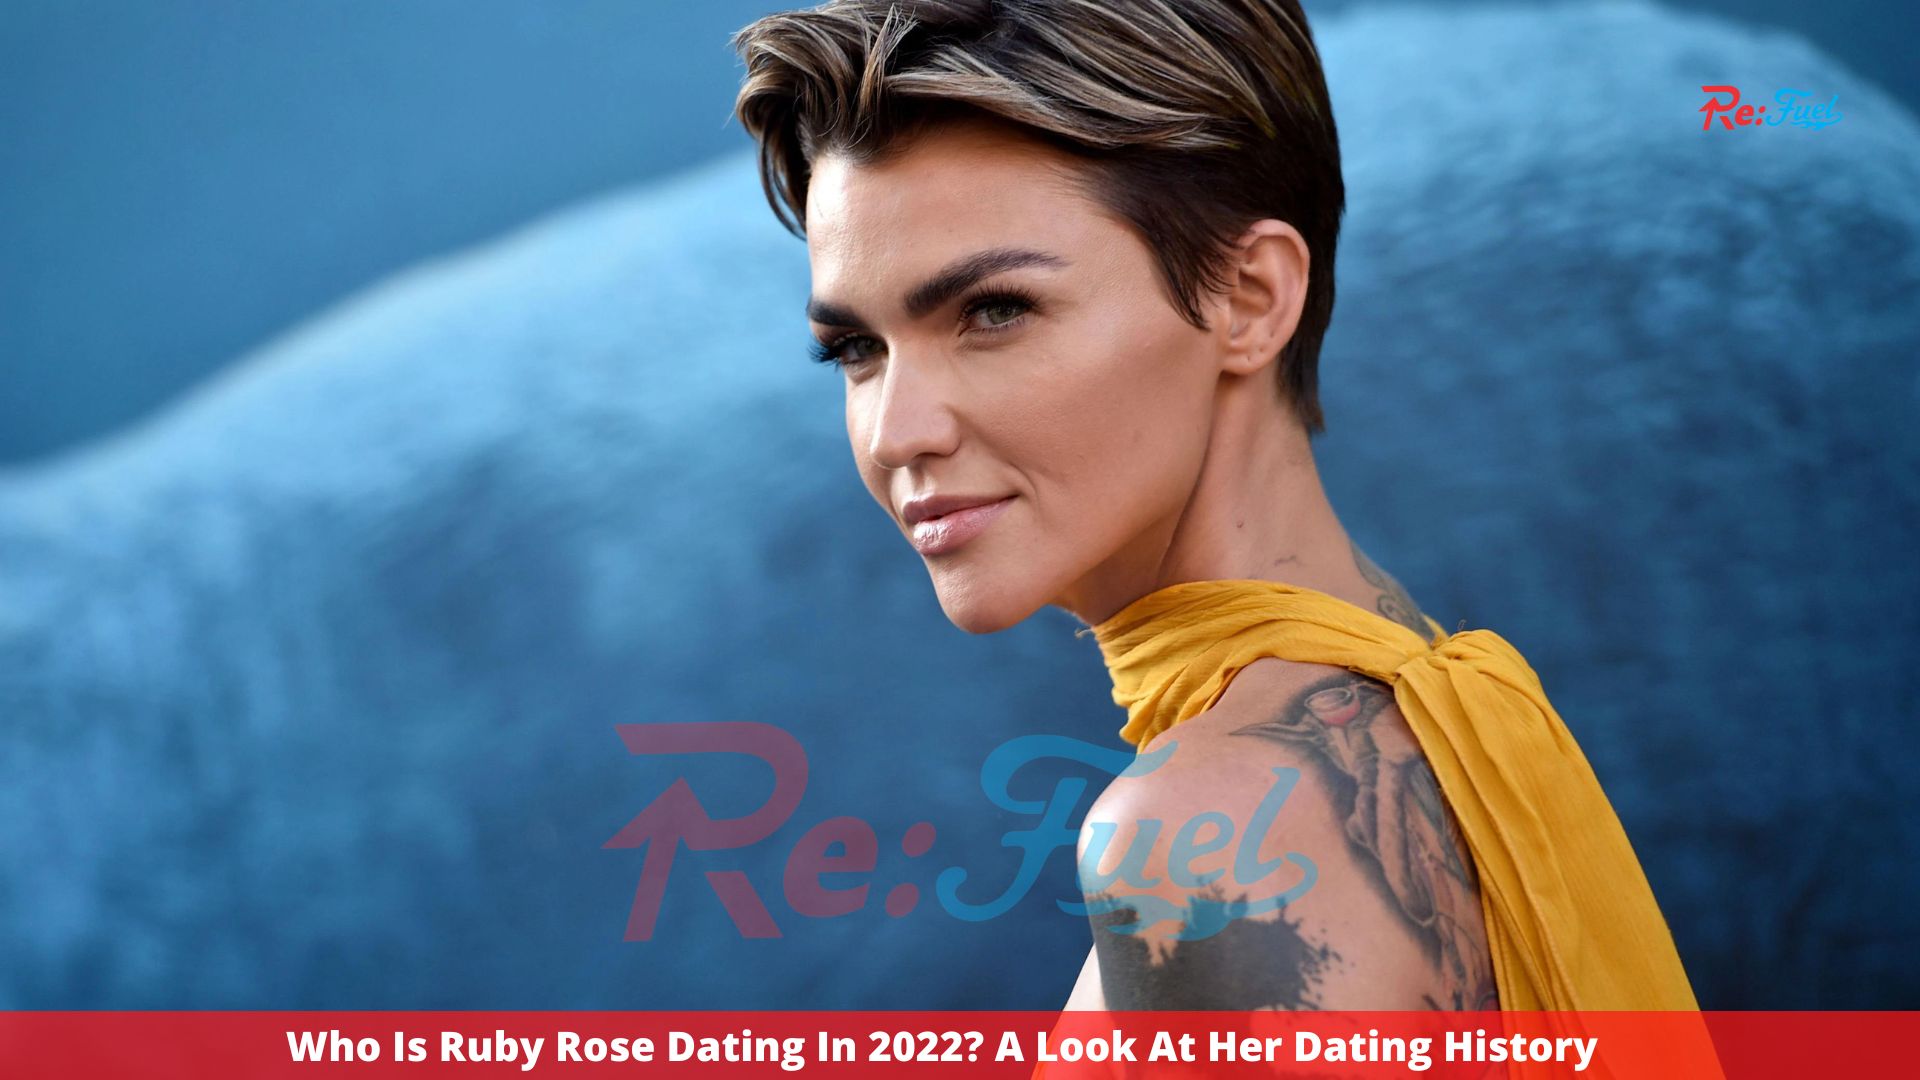 Who Is Ruby Rose Dating In 2022? A Look At Her Dating History